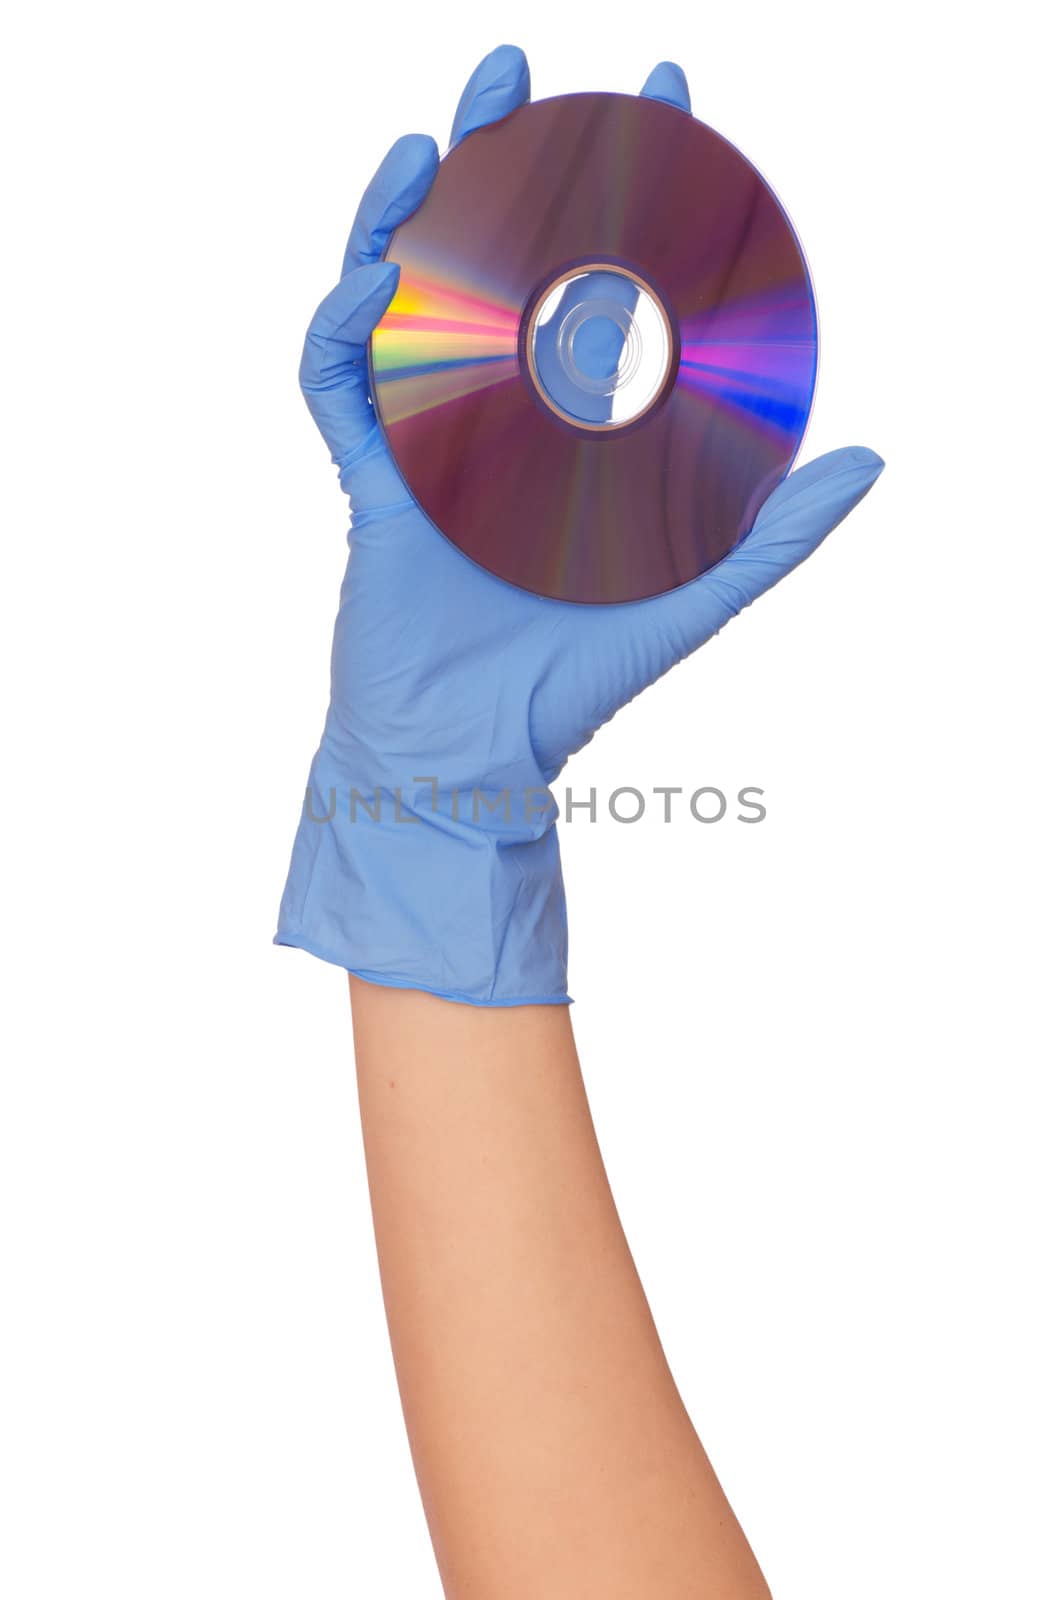 inspector in blue gloves holds in a hand confidential audio and video about hacker programs and viruses